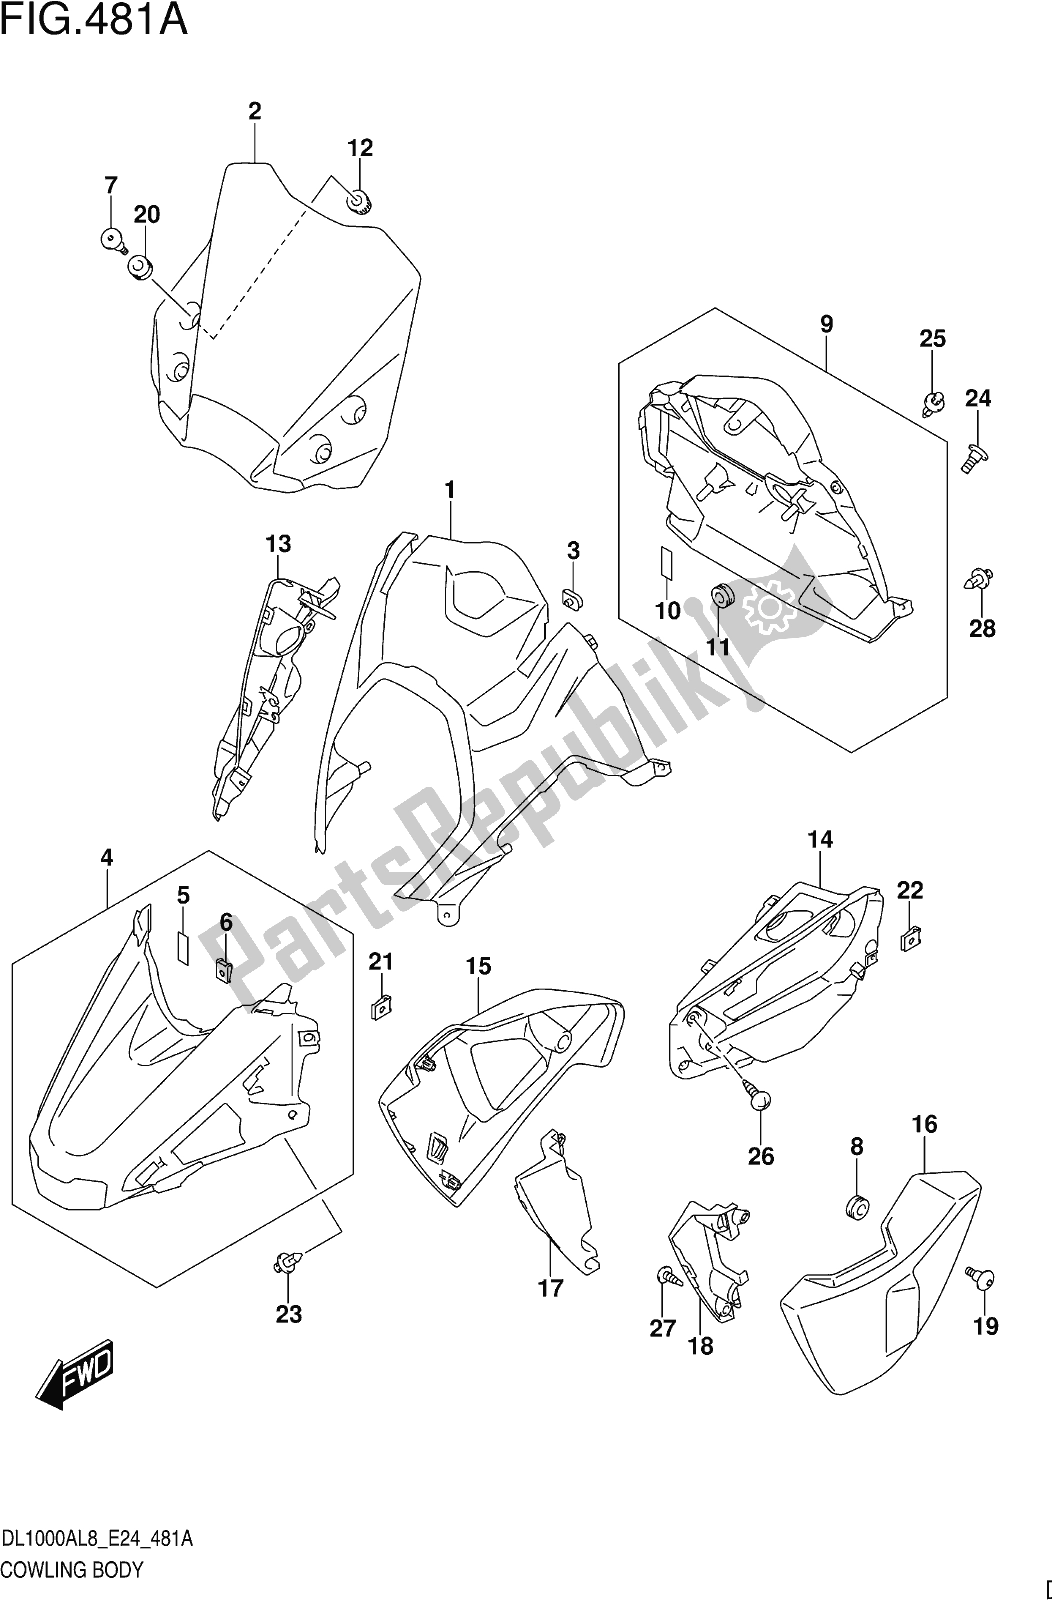 All parts for the Fig. 481a Cowling Body of the Suzuki DL 1000 XA 2018